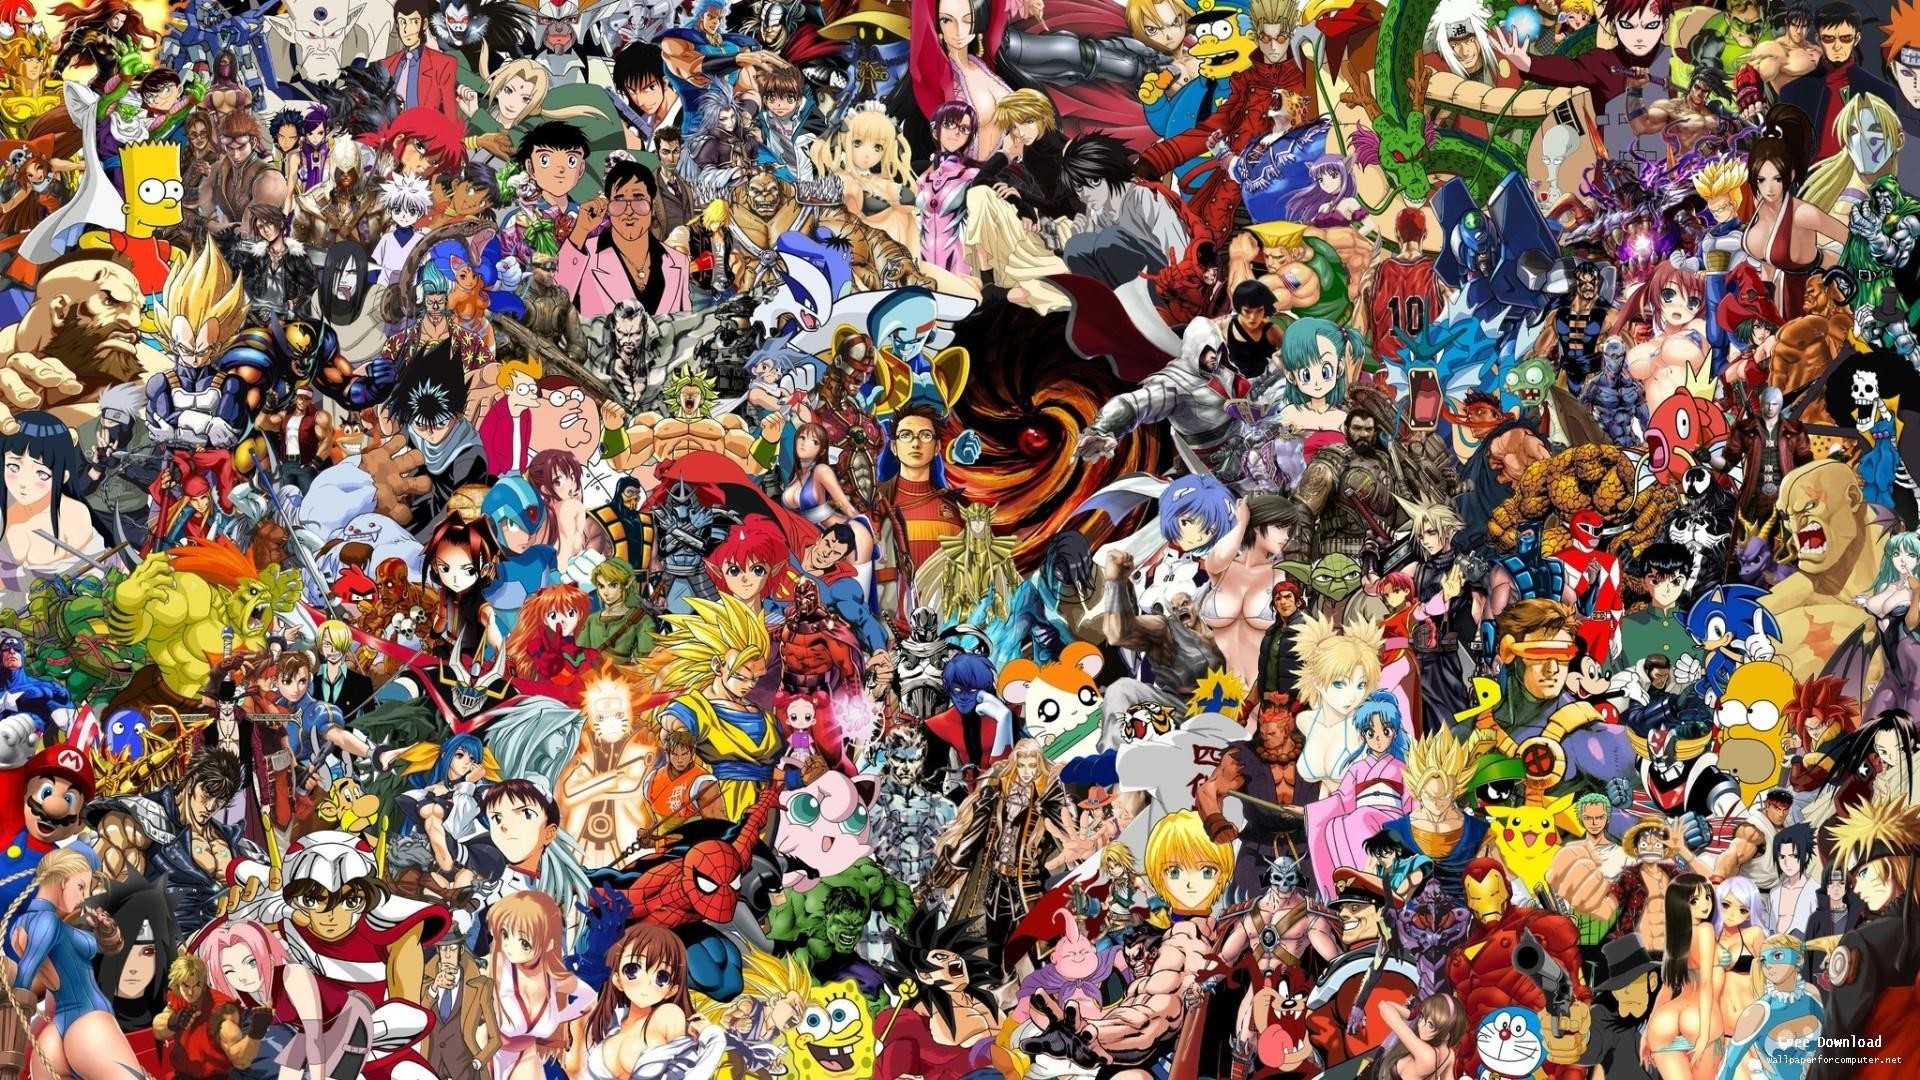 1920x1080 All Anime Characters Wallpaper